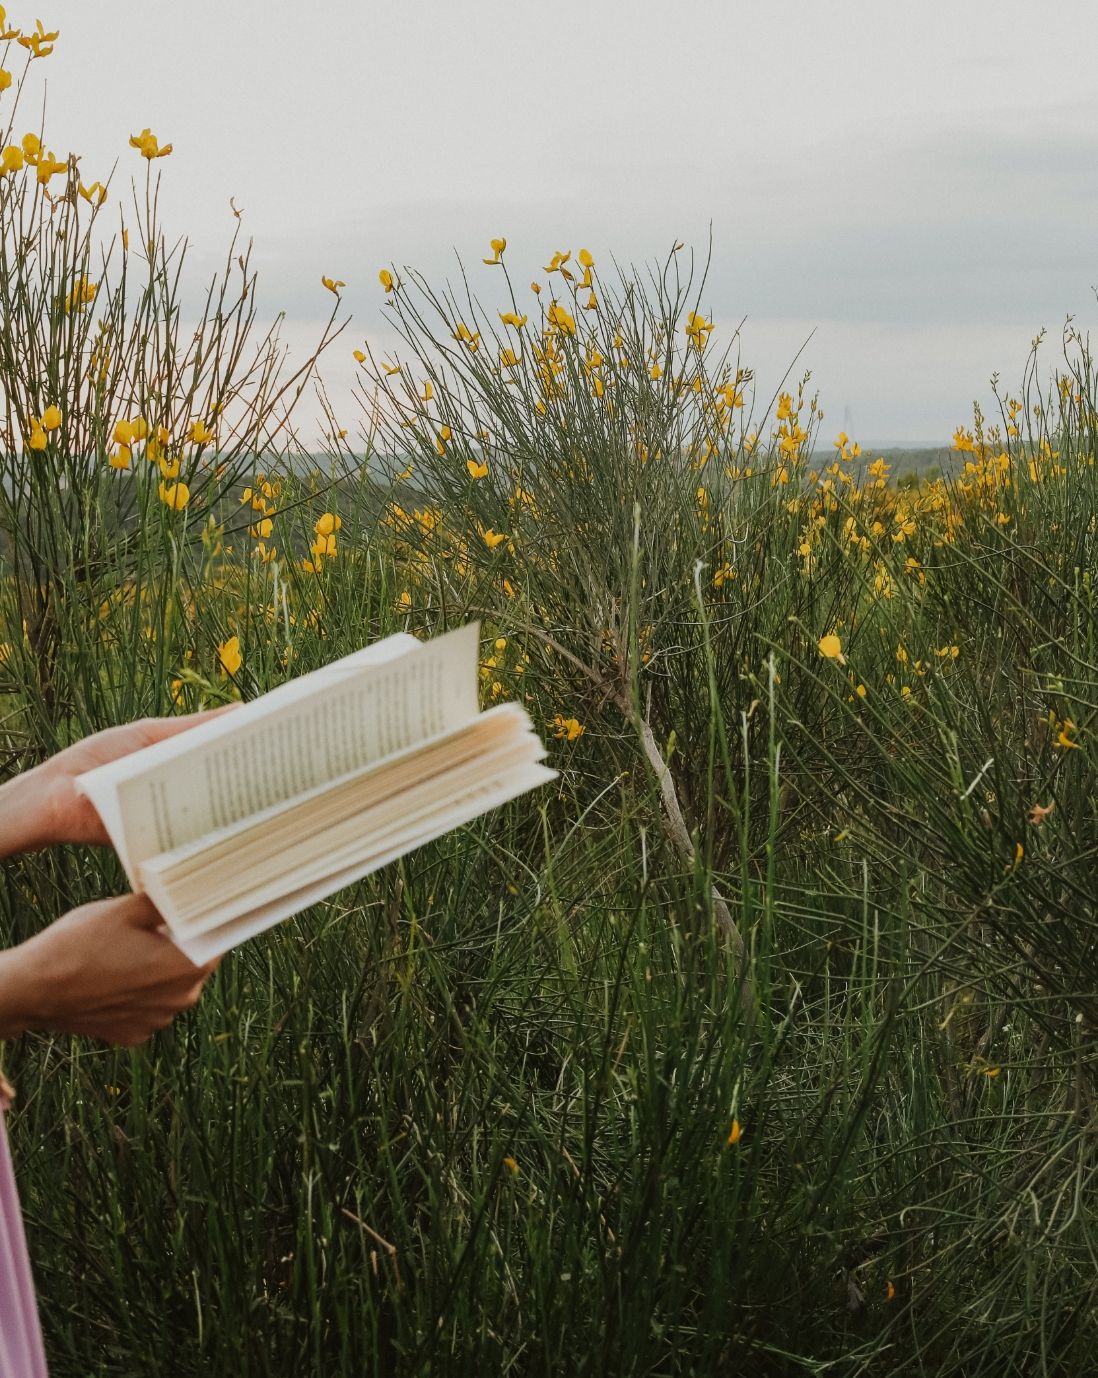 Woman’s hand holding a book in a field with yellow flowers